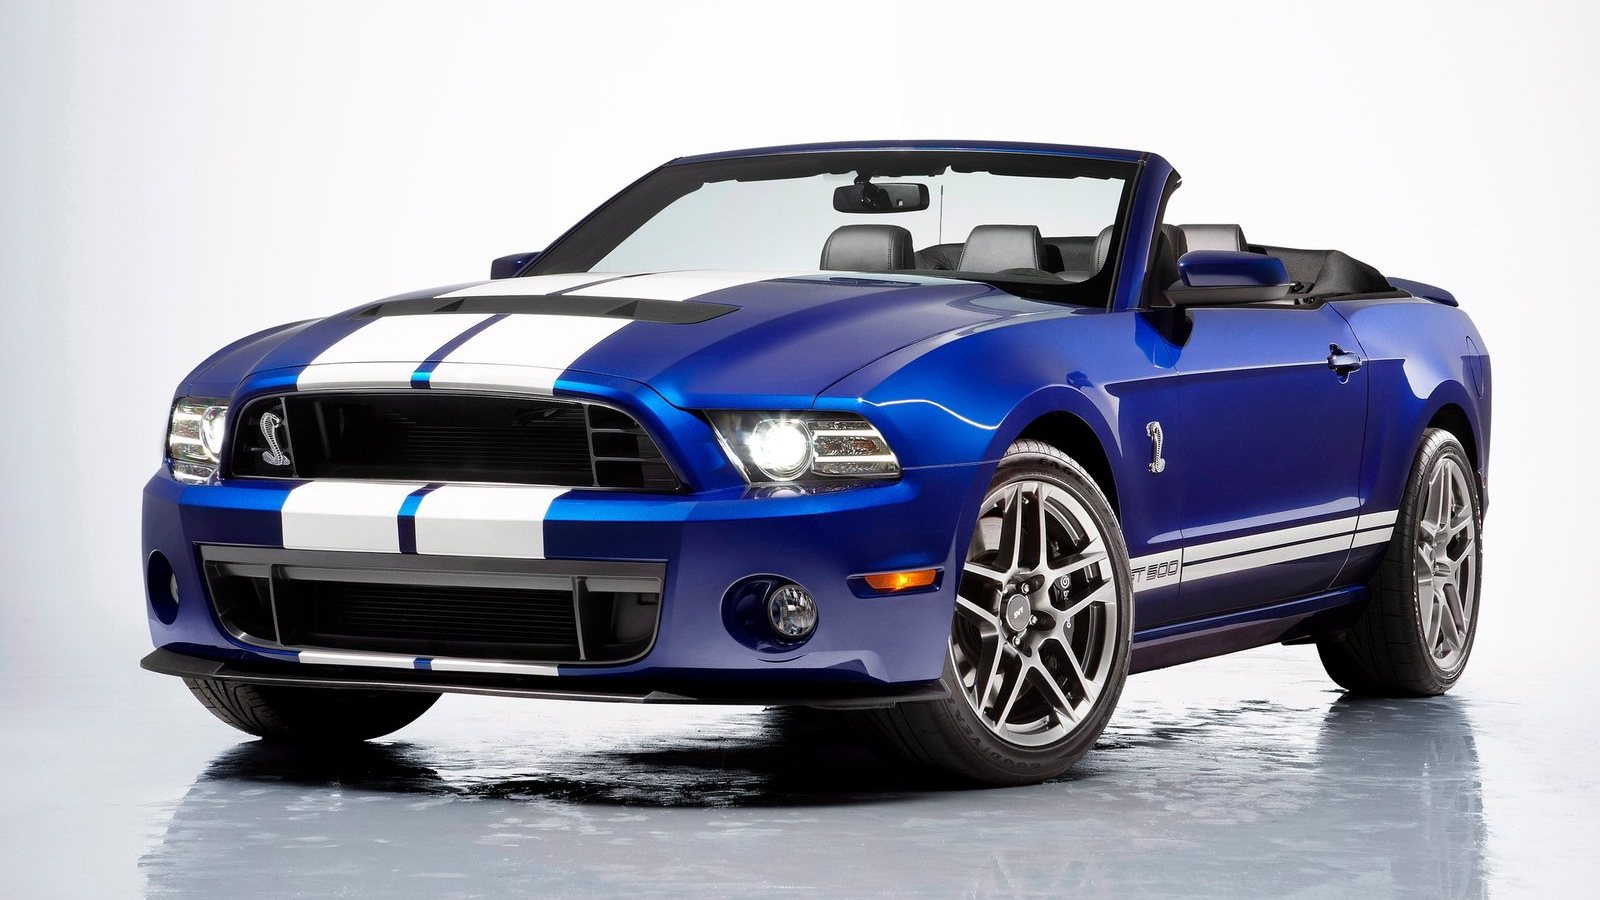 Ford shelby gt500 convertible review #1